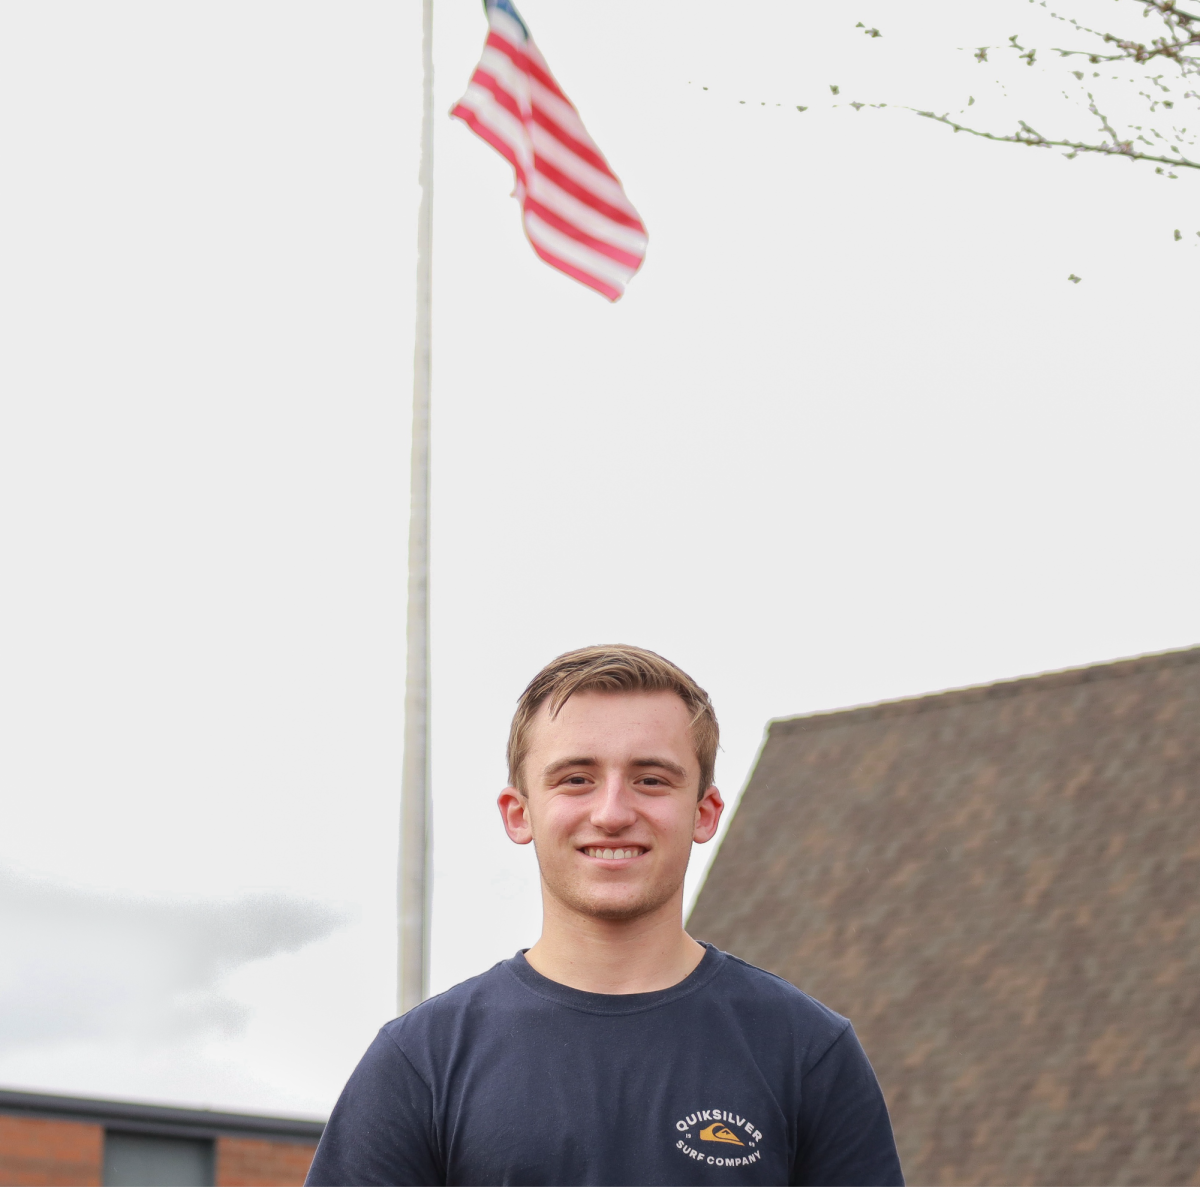 Next year, Tyler Smith will be headed to West Point, New York to attend the United States Military Academy.
